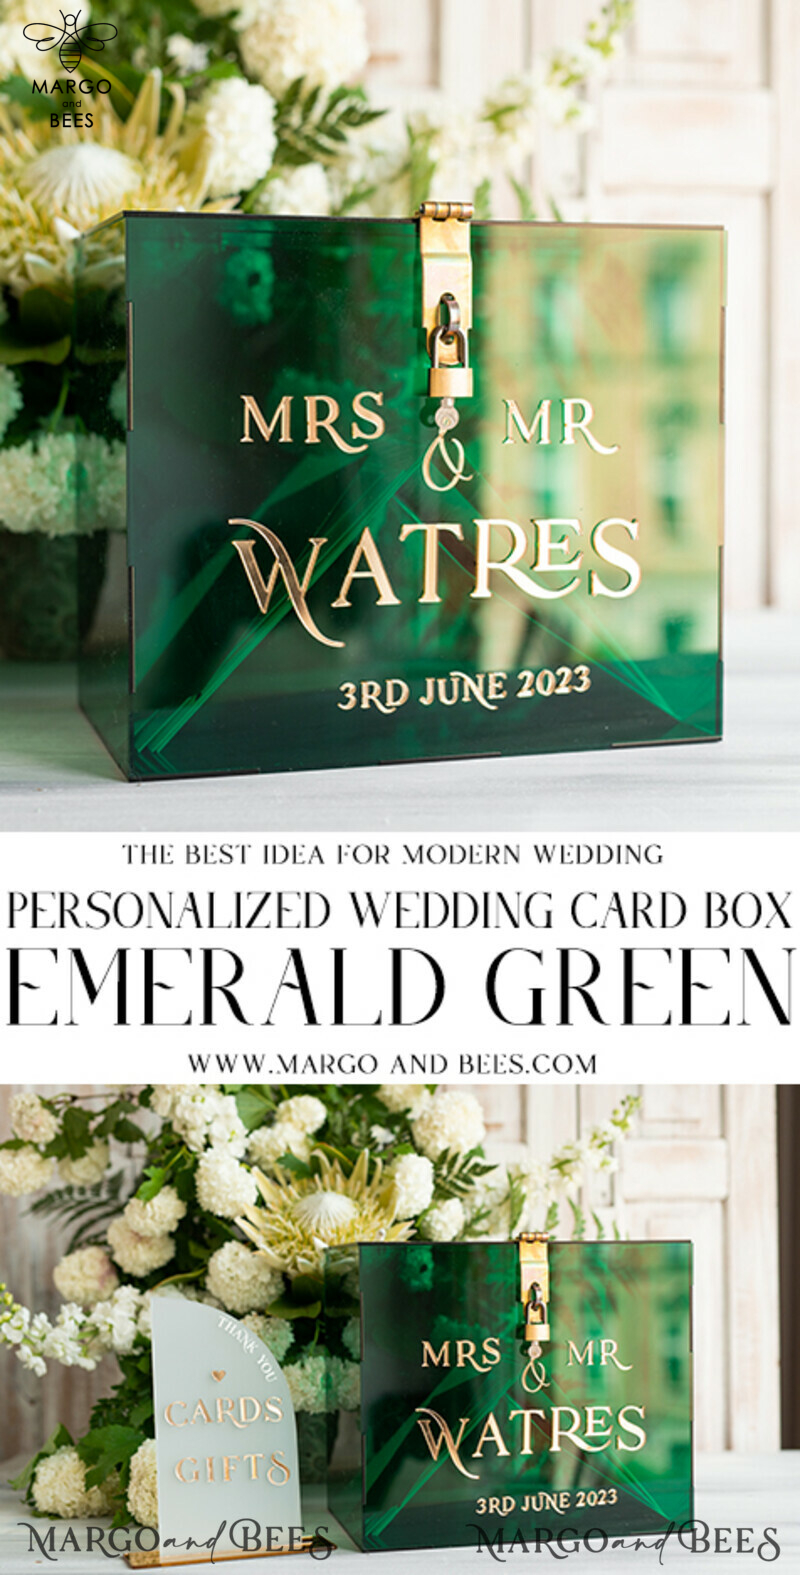 What to do with wedding card box after wedding?-21